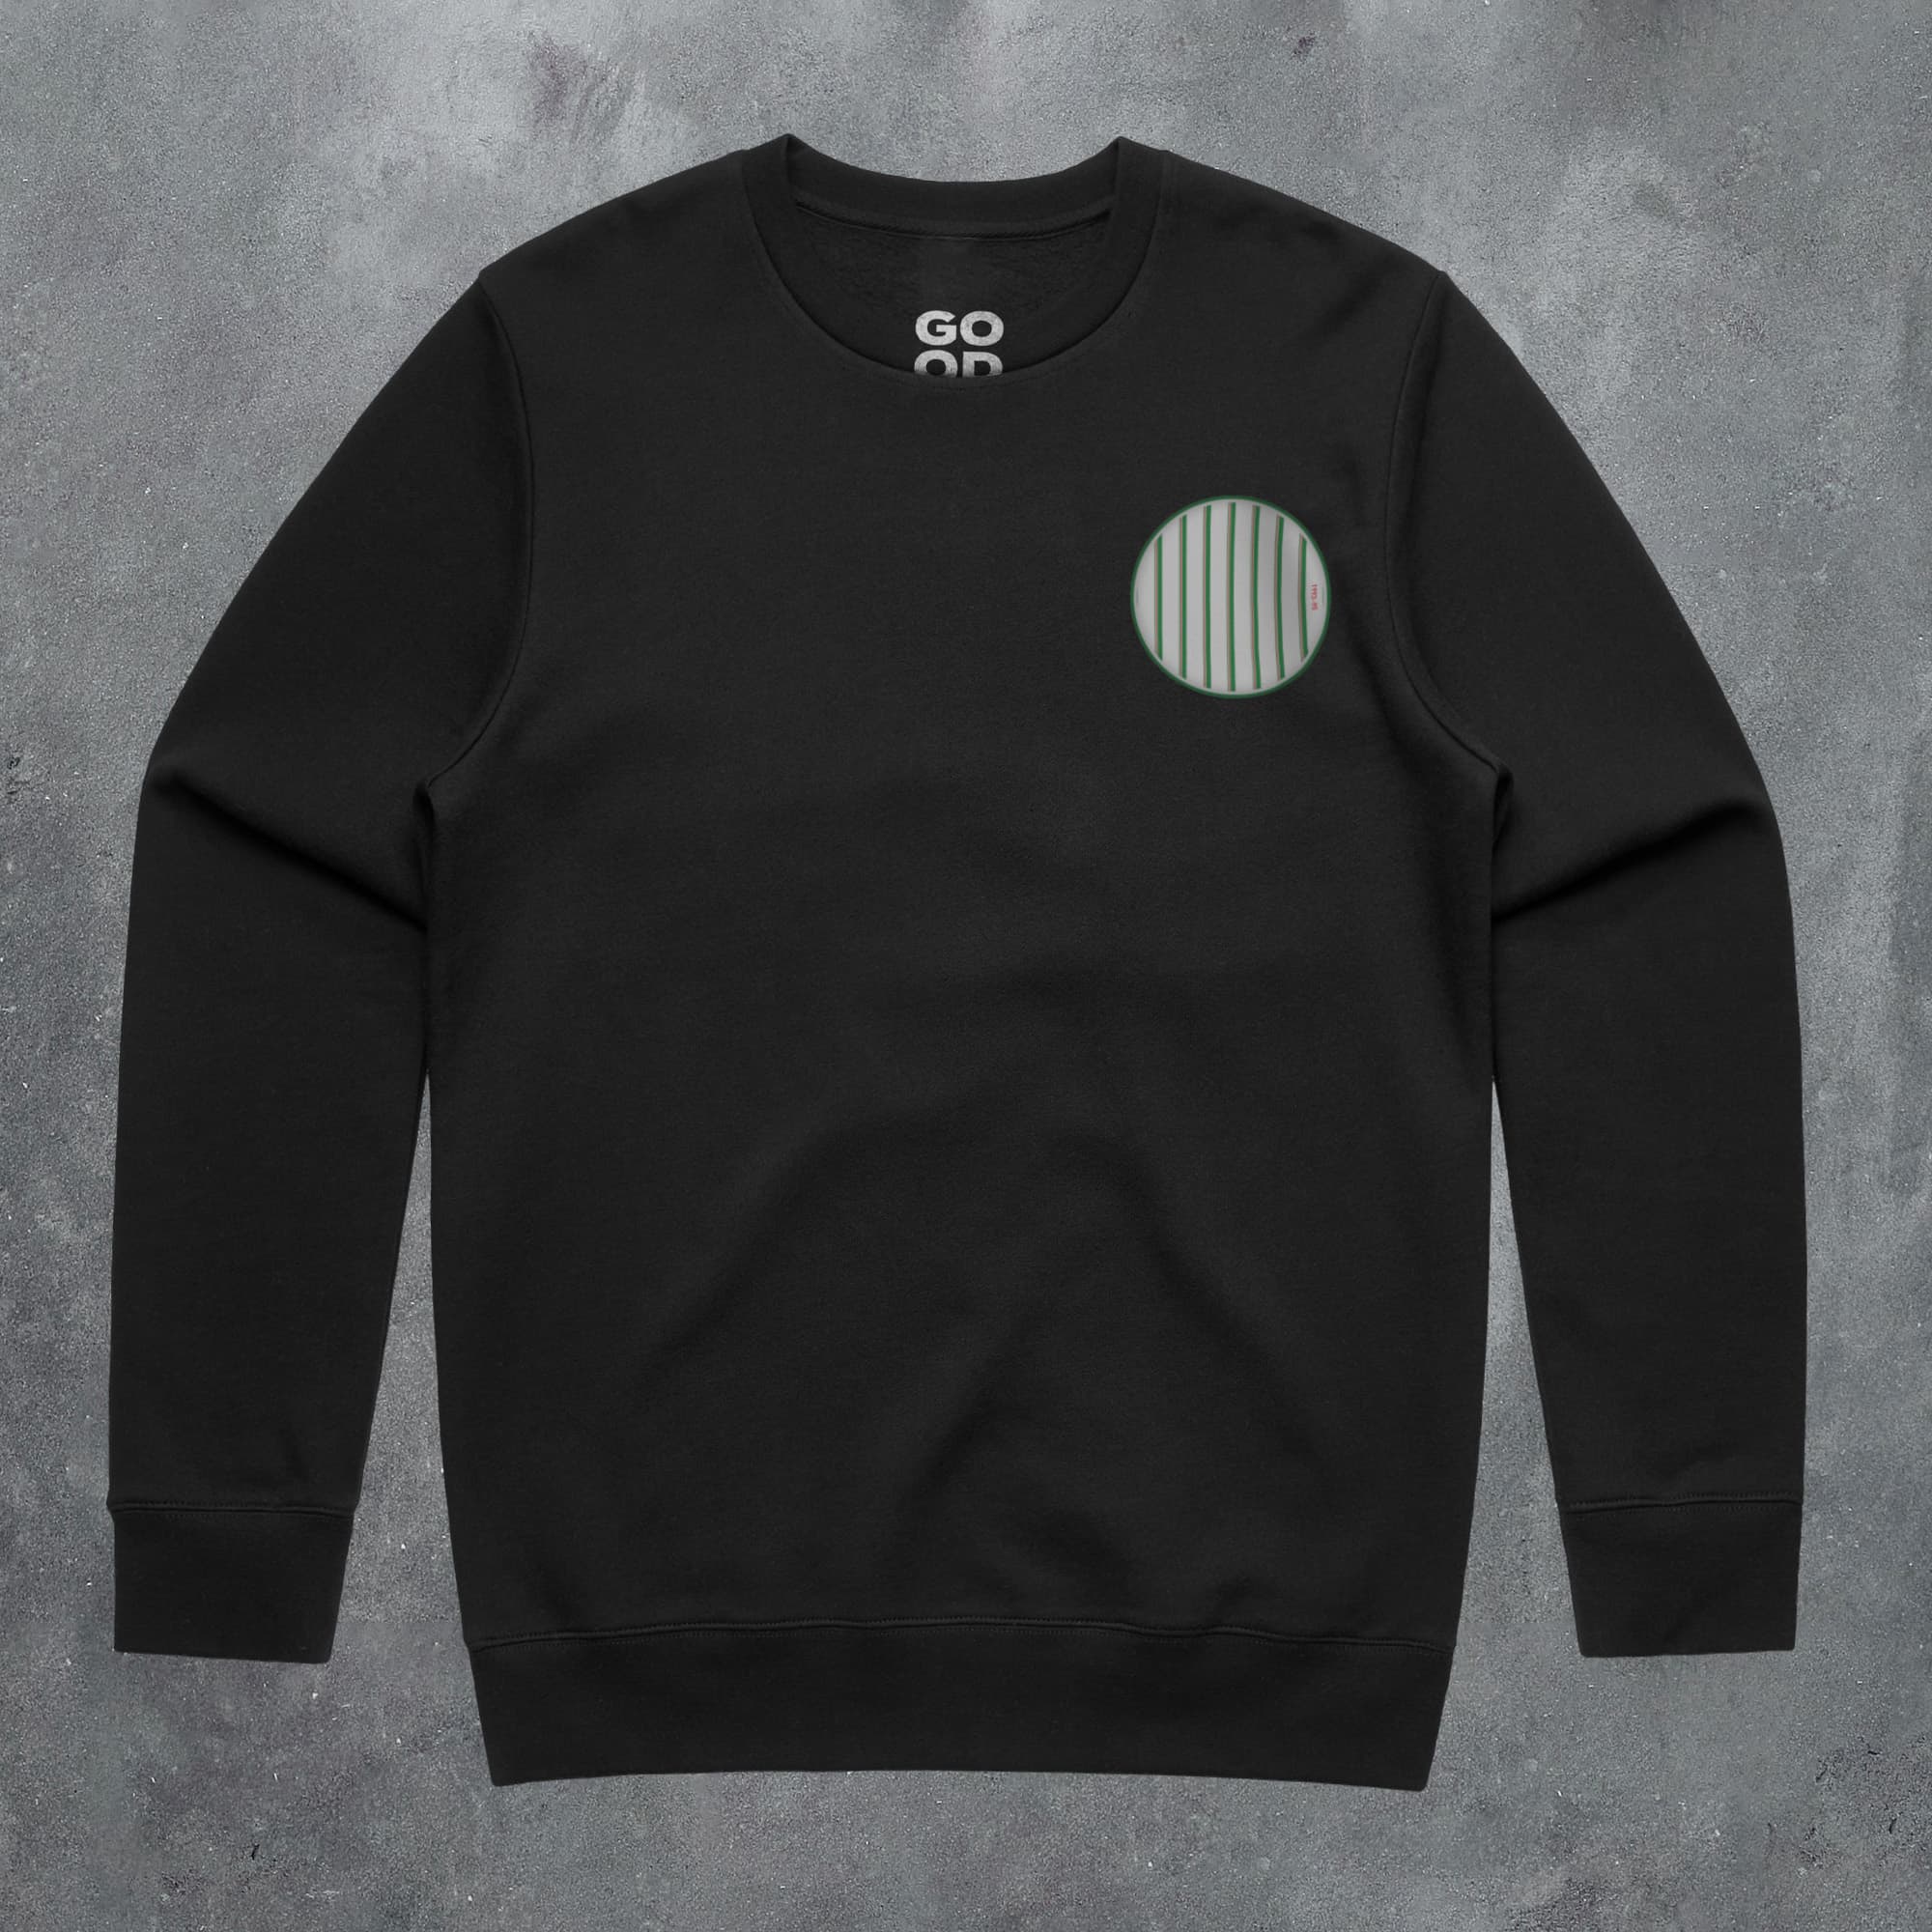 a black sweatshirt with a green circle on it